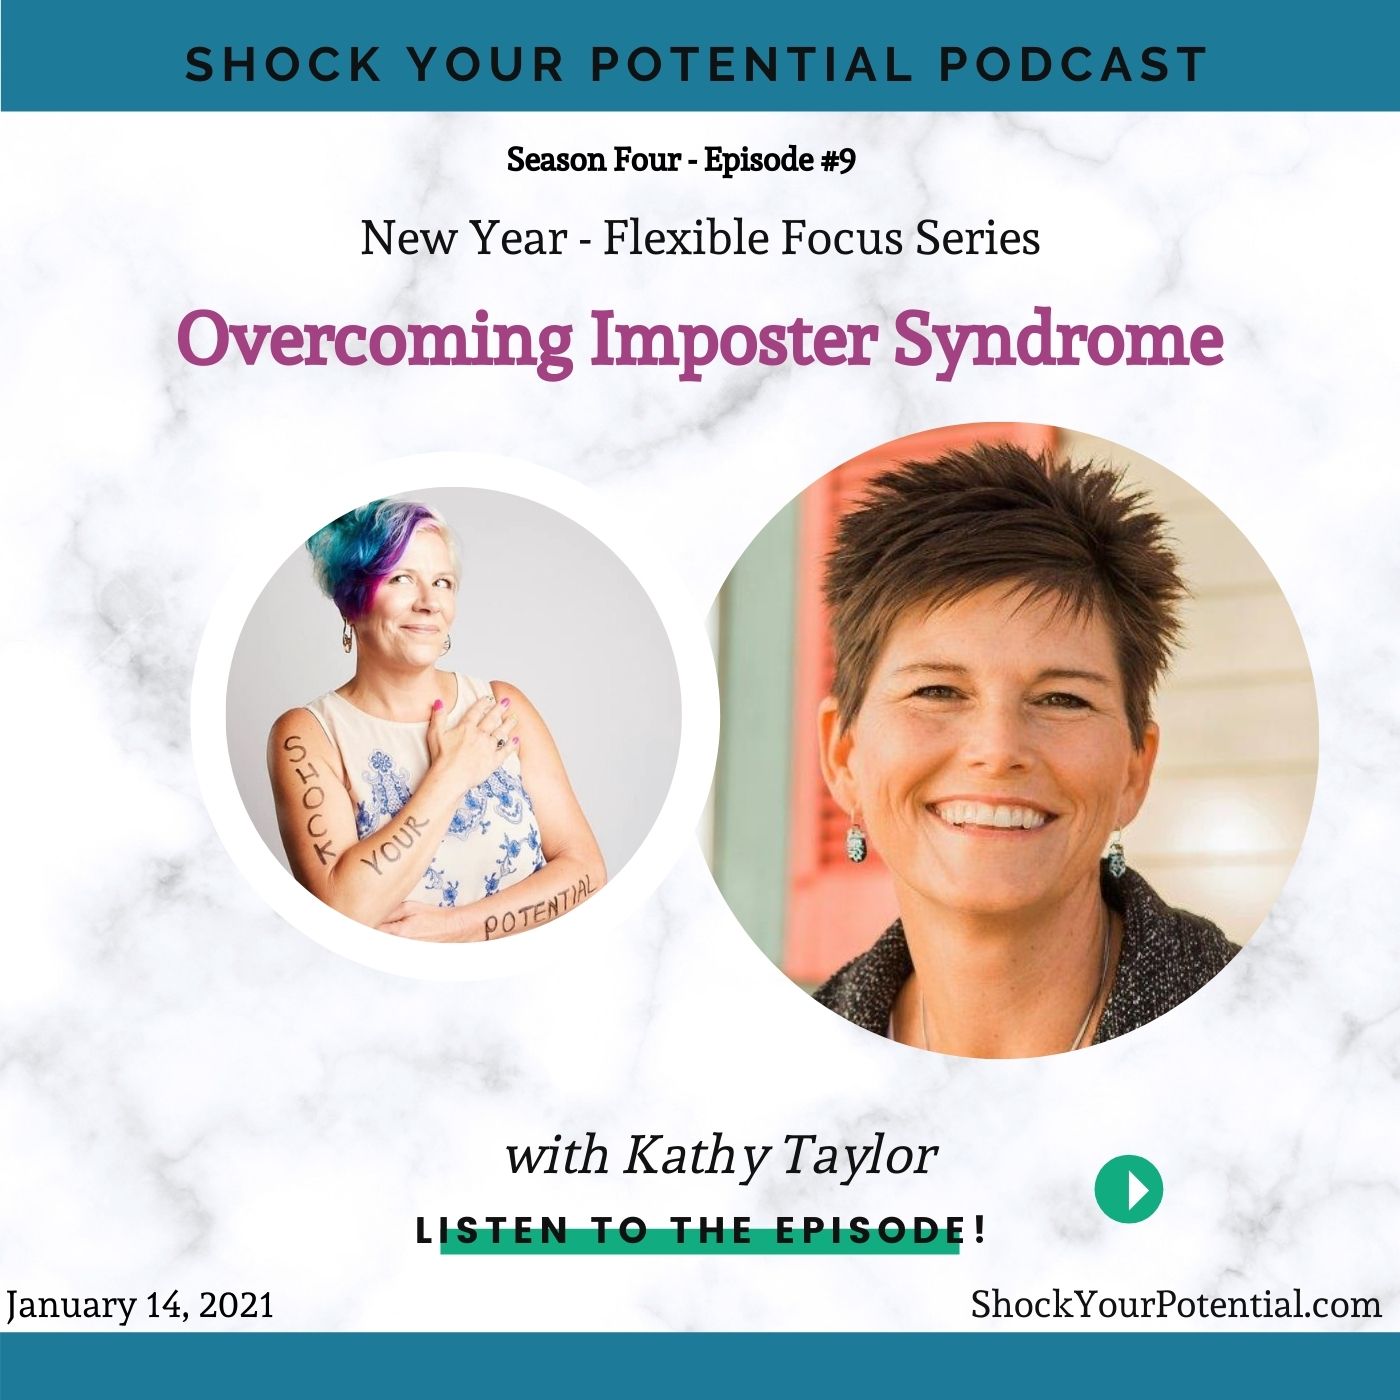 Overcoming Imposter Syndrome – Kathy Taylor